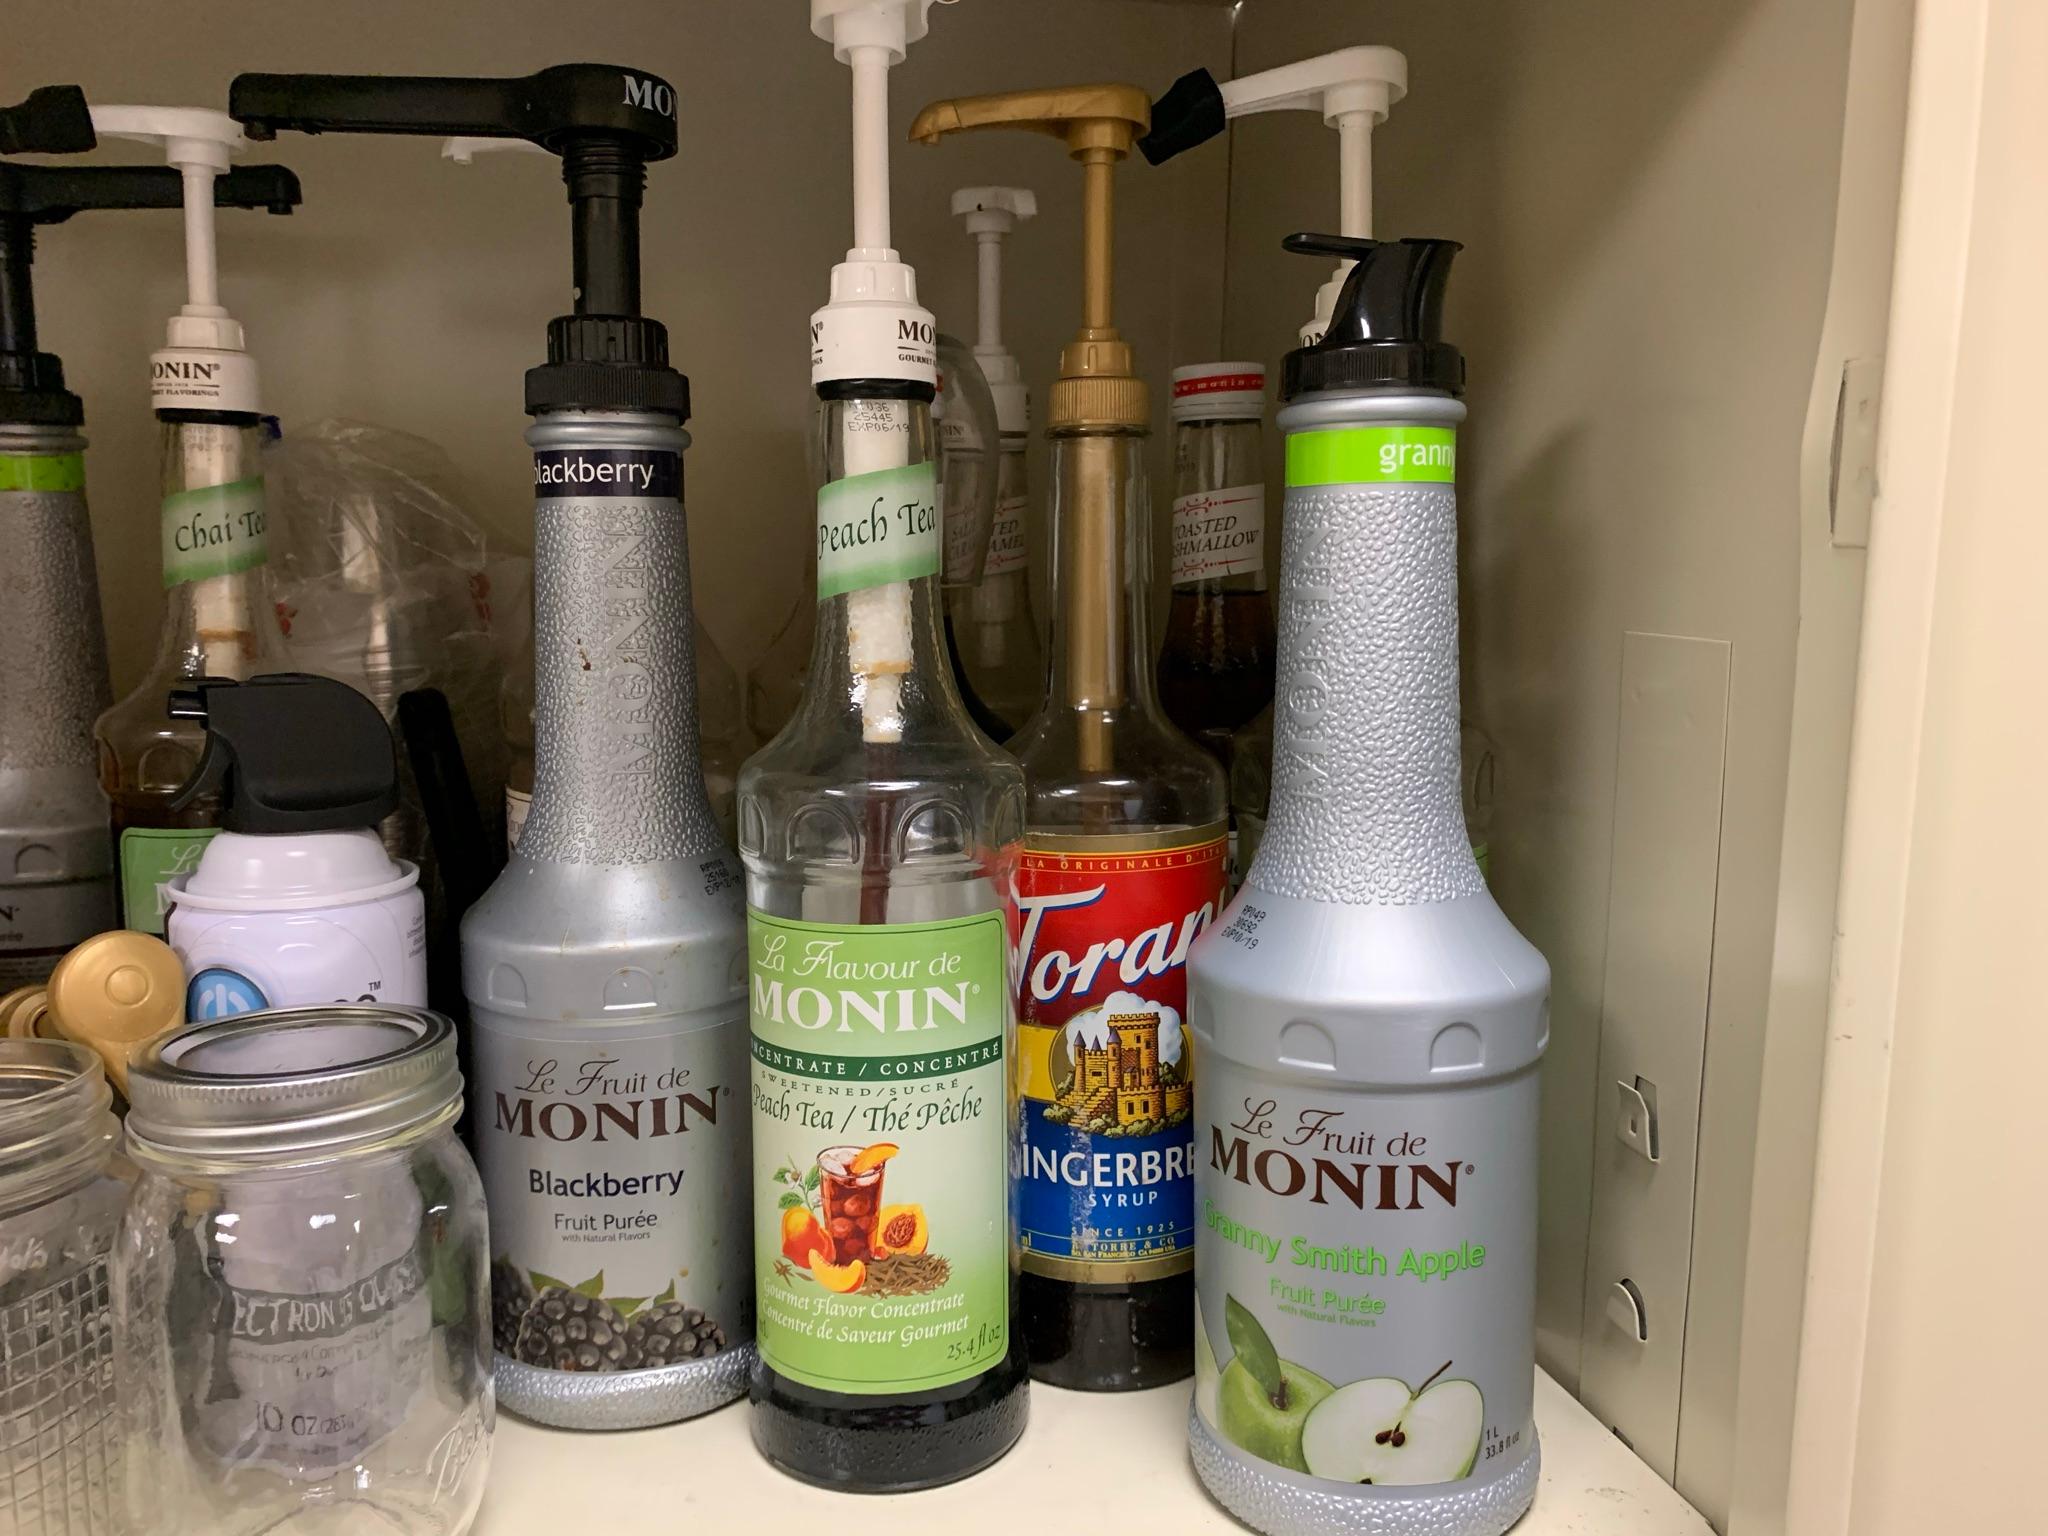 Metal Cabinet & Contents - Drink Syrups, Salt & Pepper Shakers, Mean Green Cleaner & More